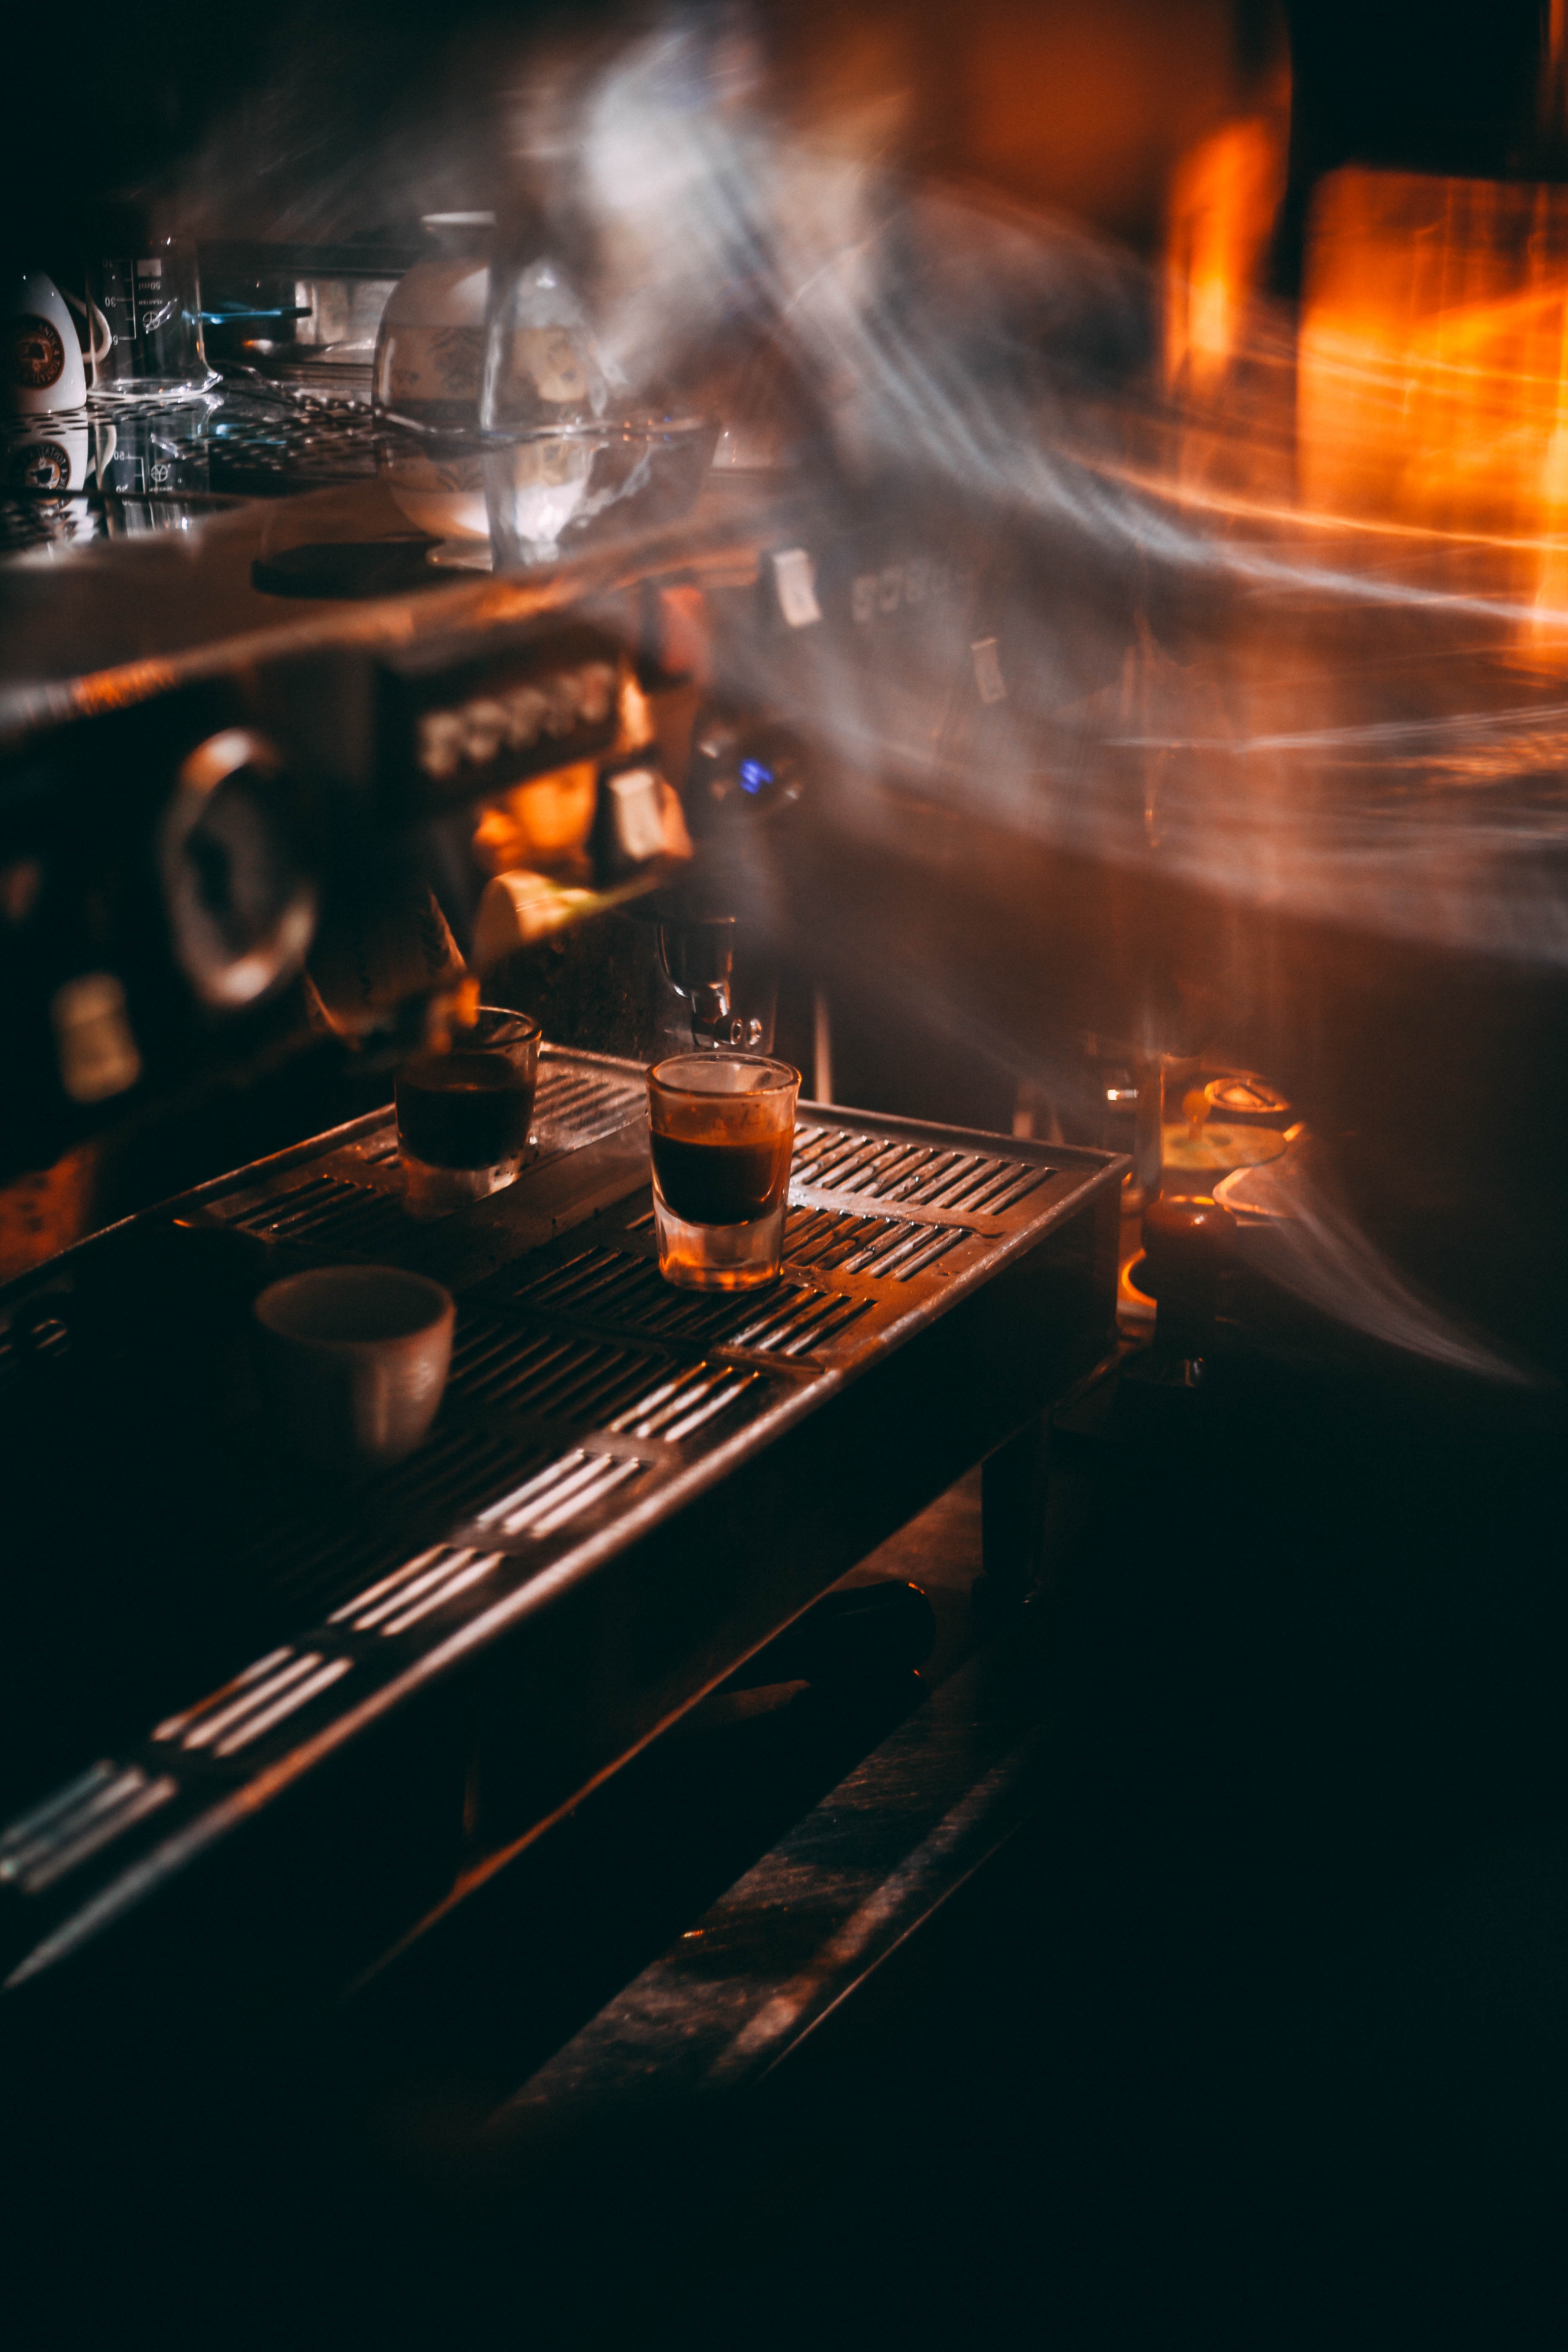 102373 download wallpaper coffee, dark, miscellanea, miscellaneous, blur, smooth, café, coffee machine, coffee house screensavers and pictures for free